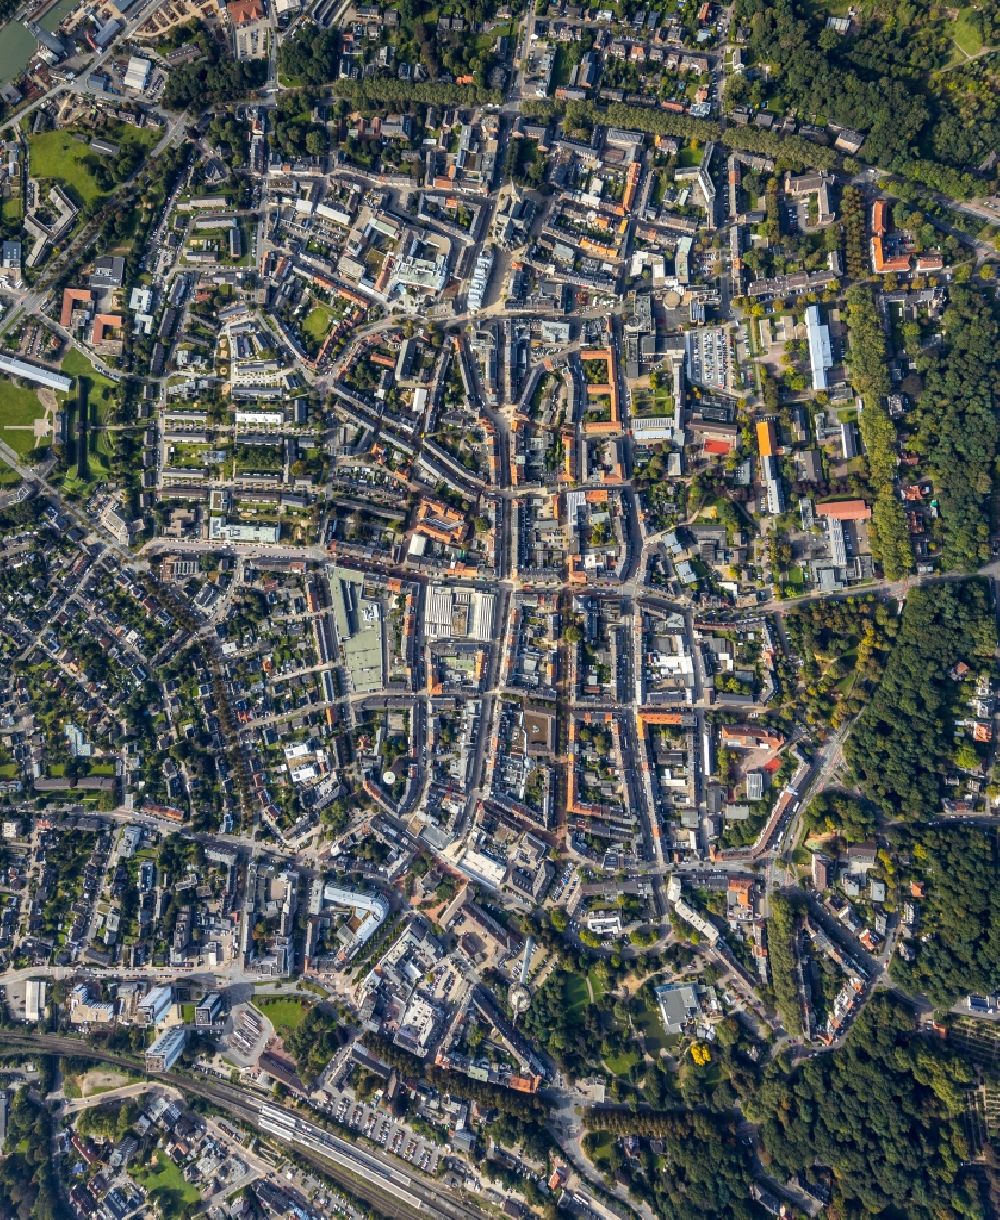 Vertical aerial photograph Wesel - Vertical aerial view from the satellite perspective of the old Town area and city center on the banks of the Rhine in Wesel at Ruhrgebiet in the state North Rhine-Westphalia, Germany